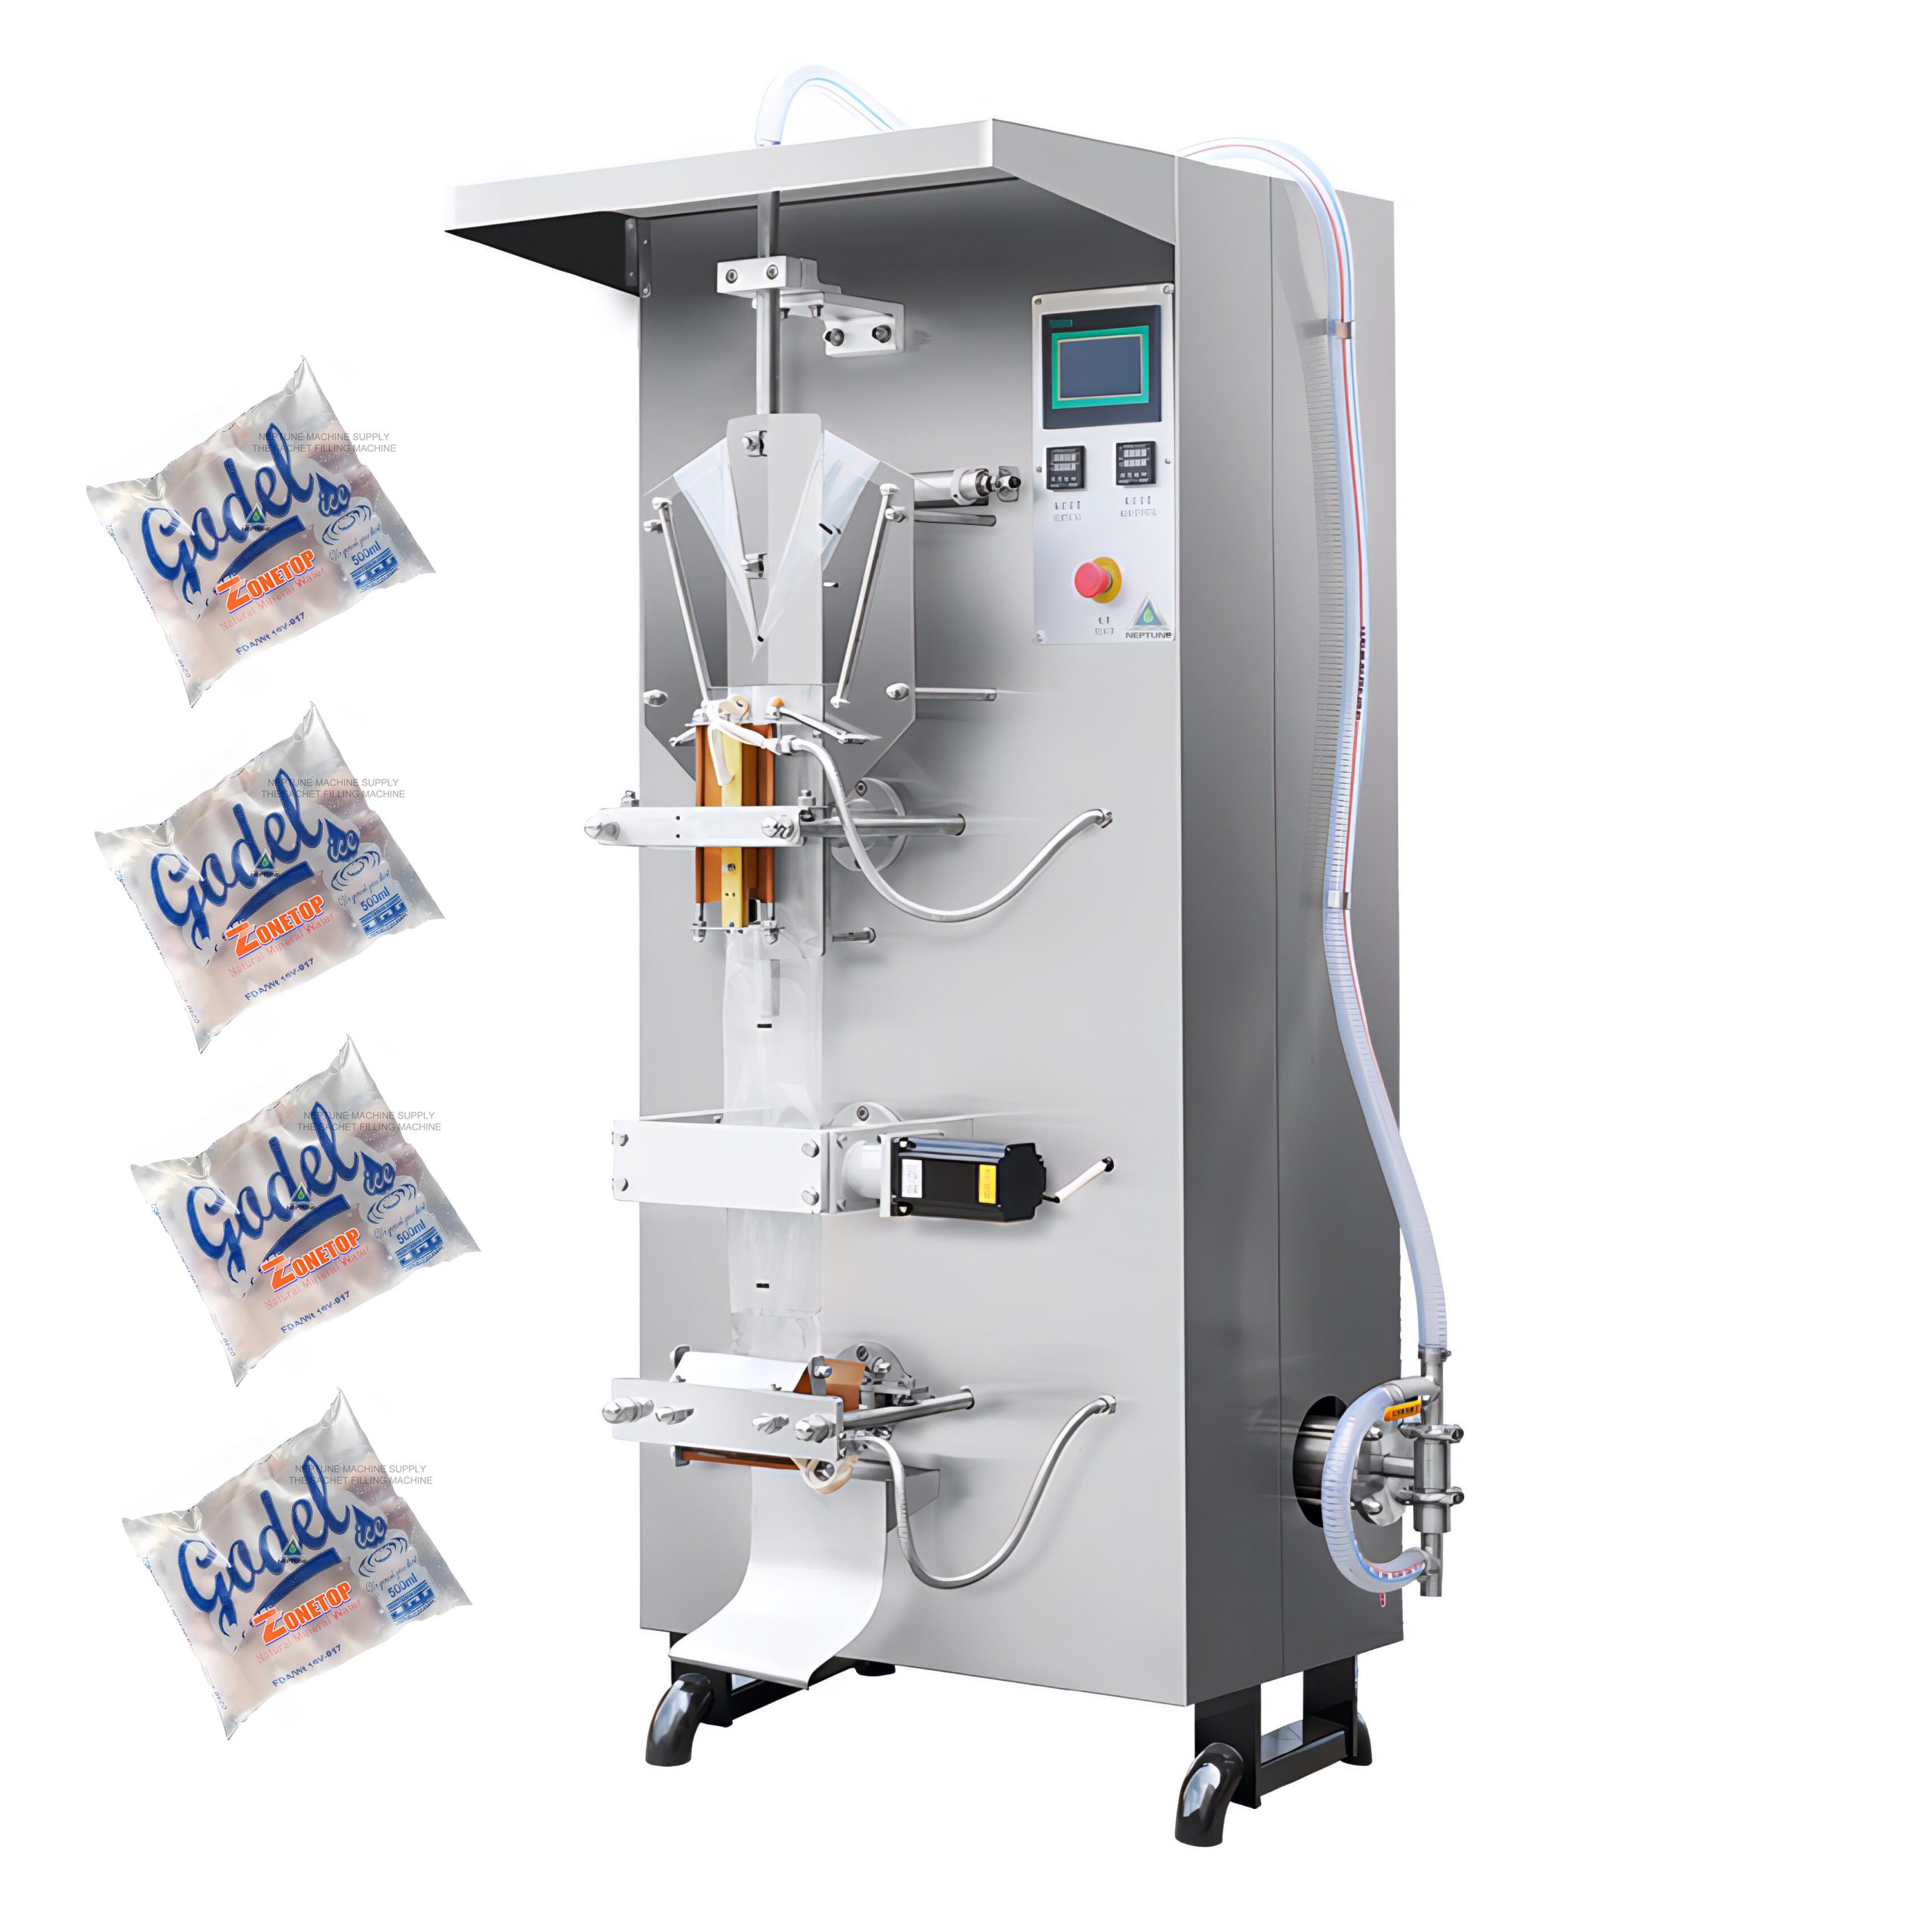 SL 2000 Sachet water packaging machine with photocell monitoring